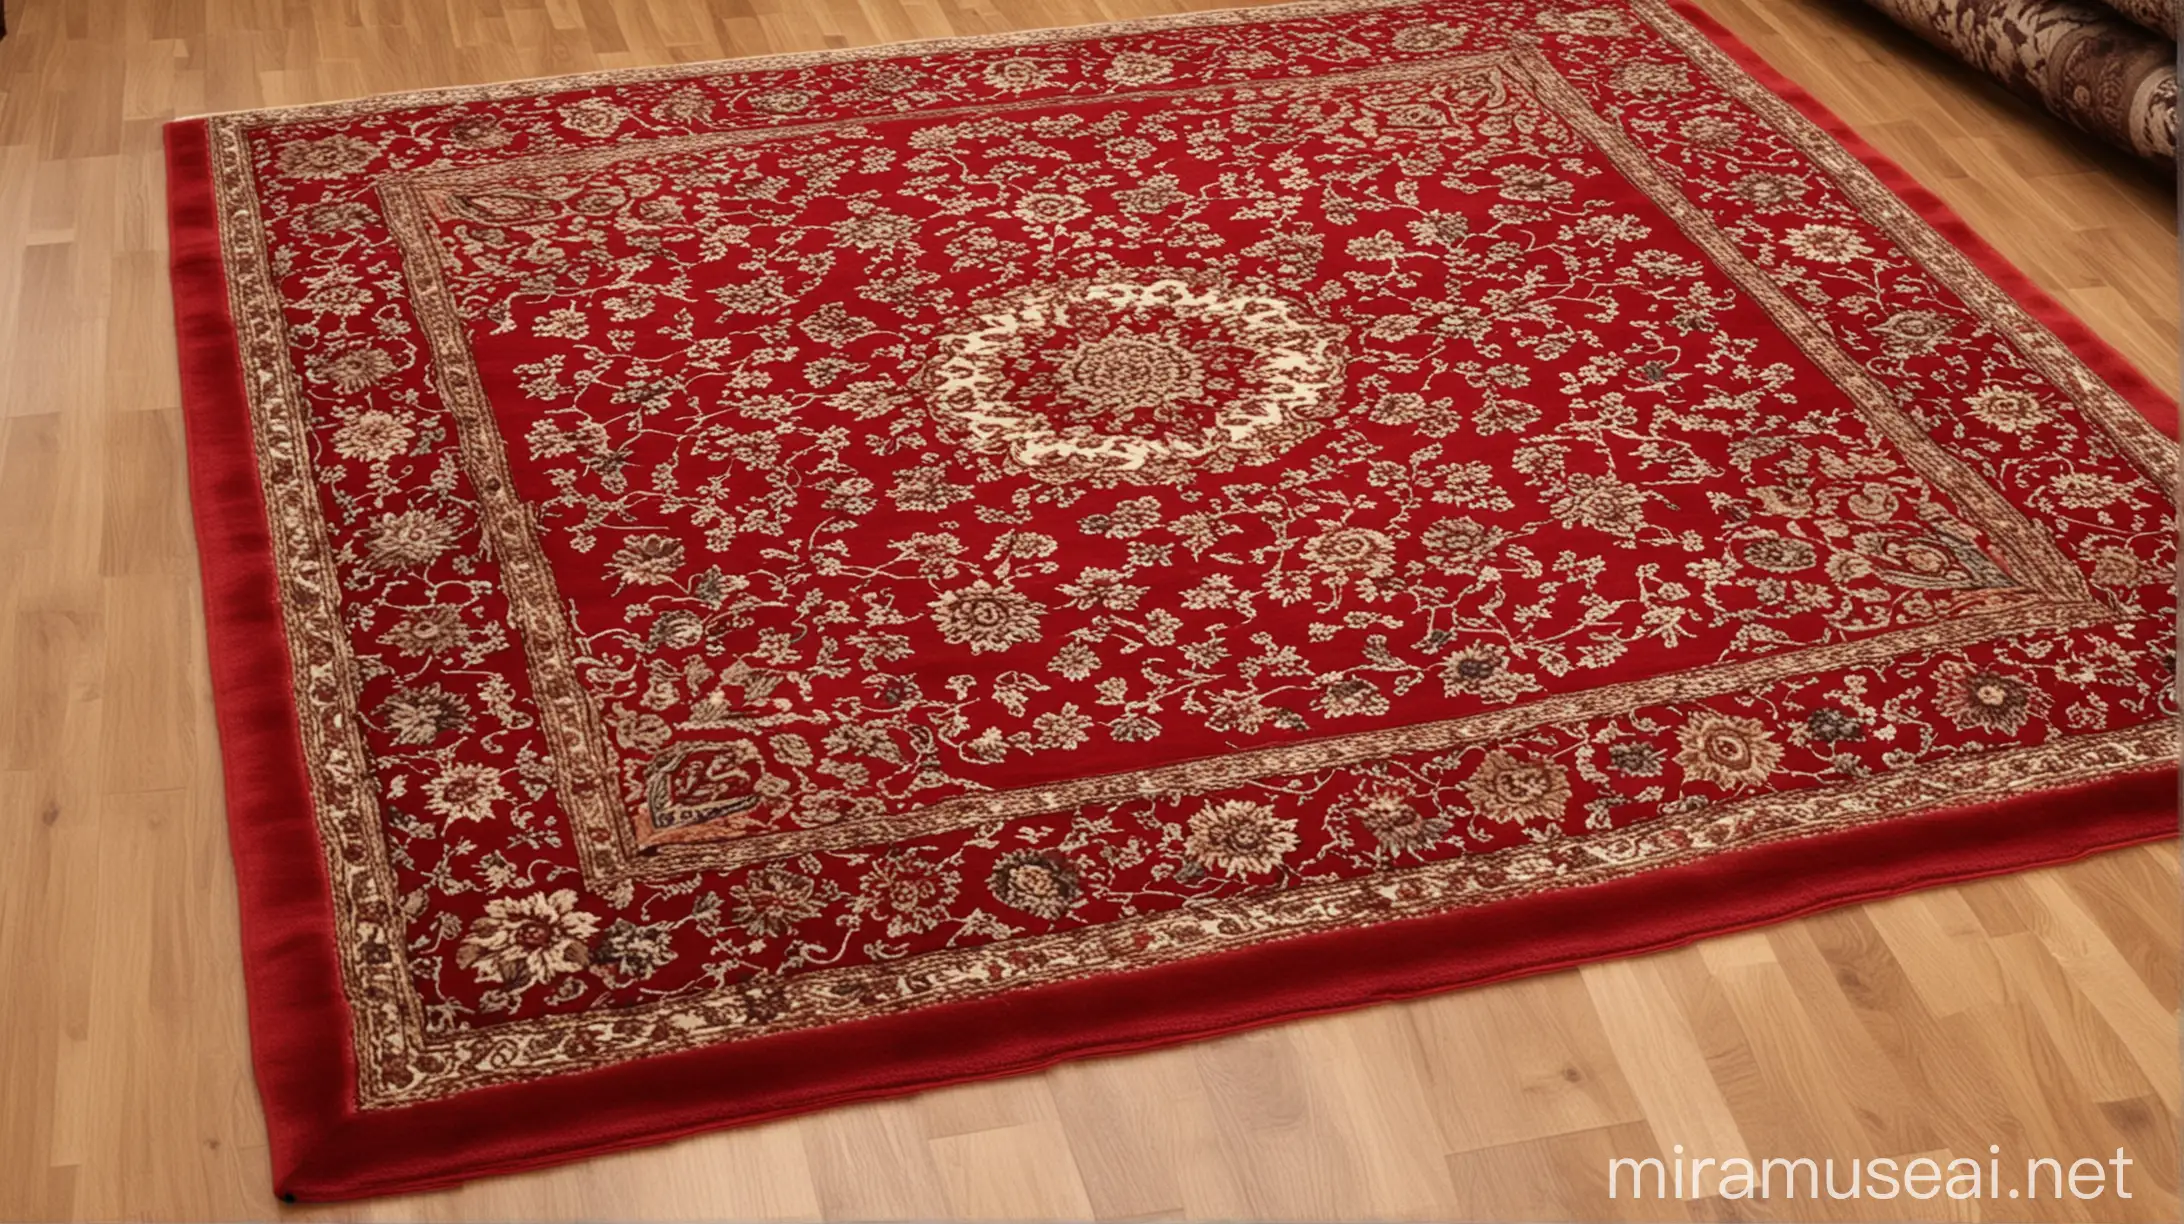 Get The picture of beautiful and special Carpet or rug with red color 